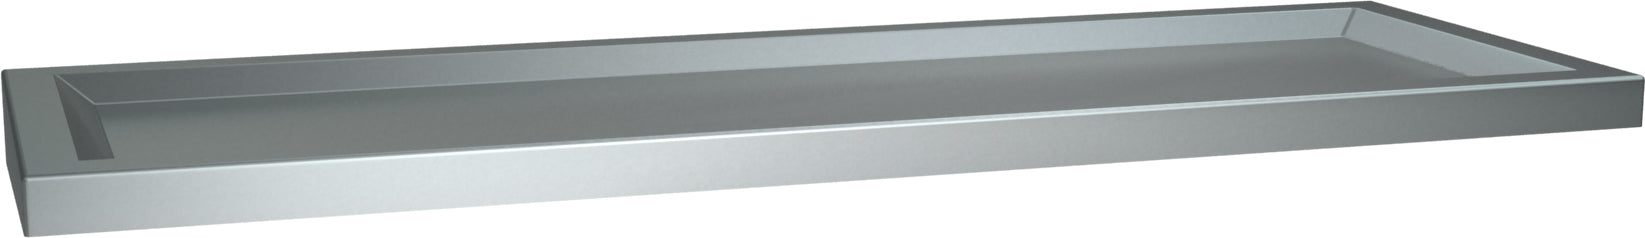 ASI 0690-18 Shelf With Raised Edges, Surface Mounted, 18" Stainless Steel